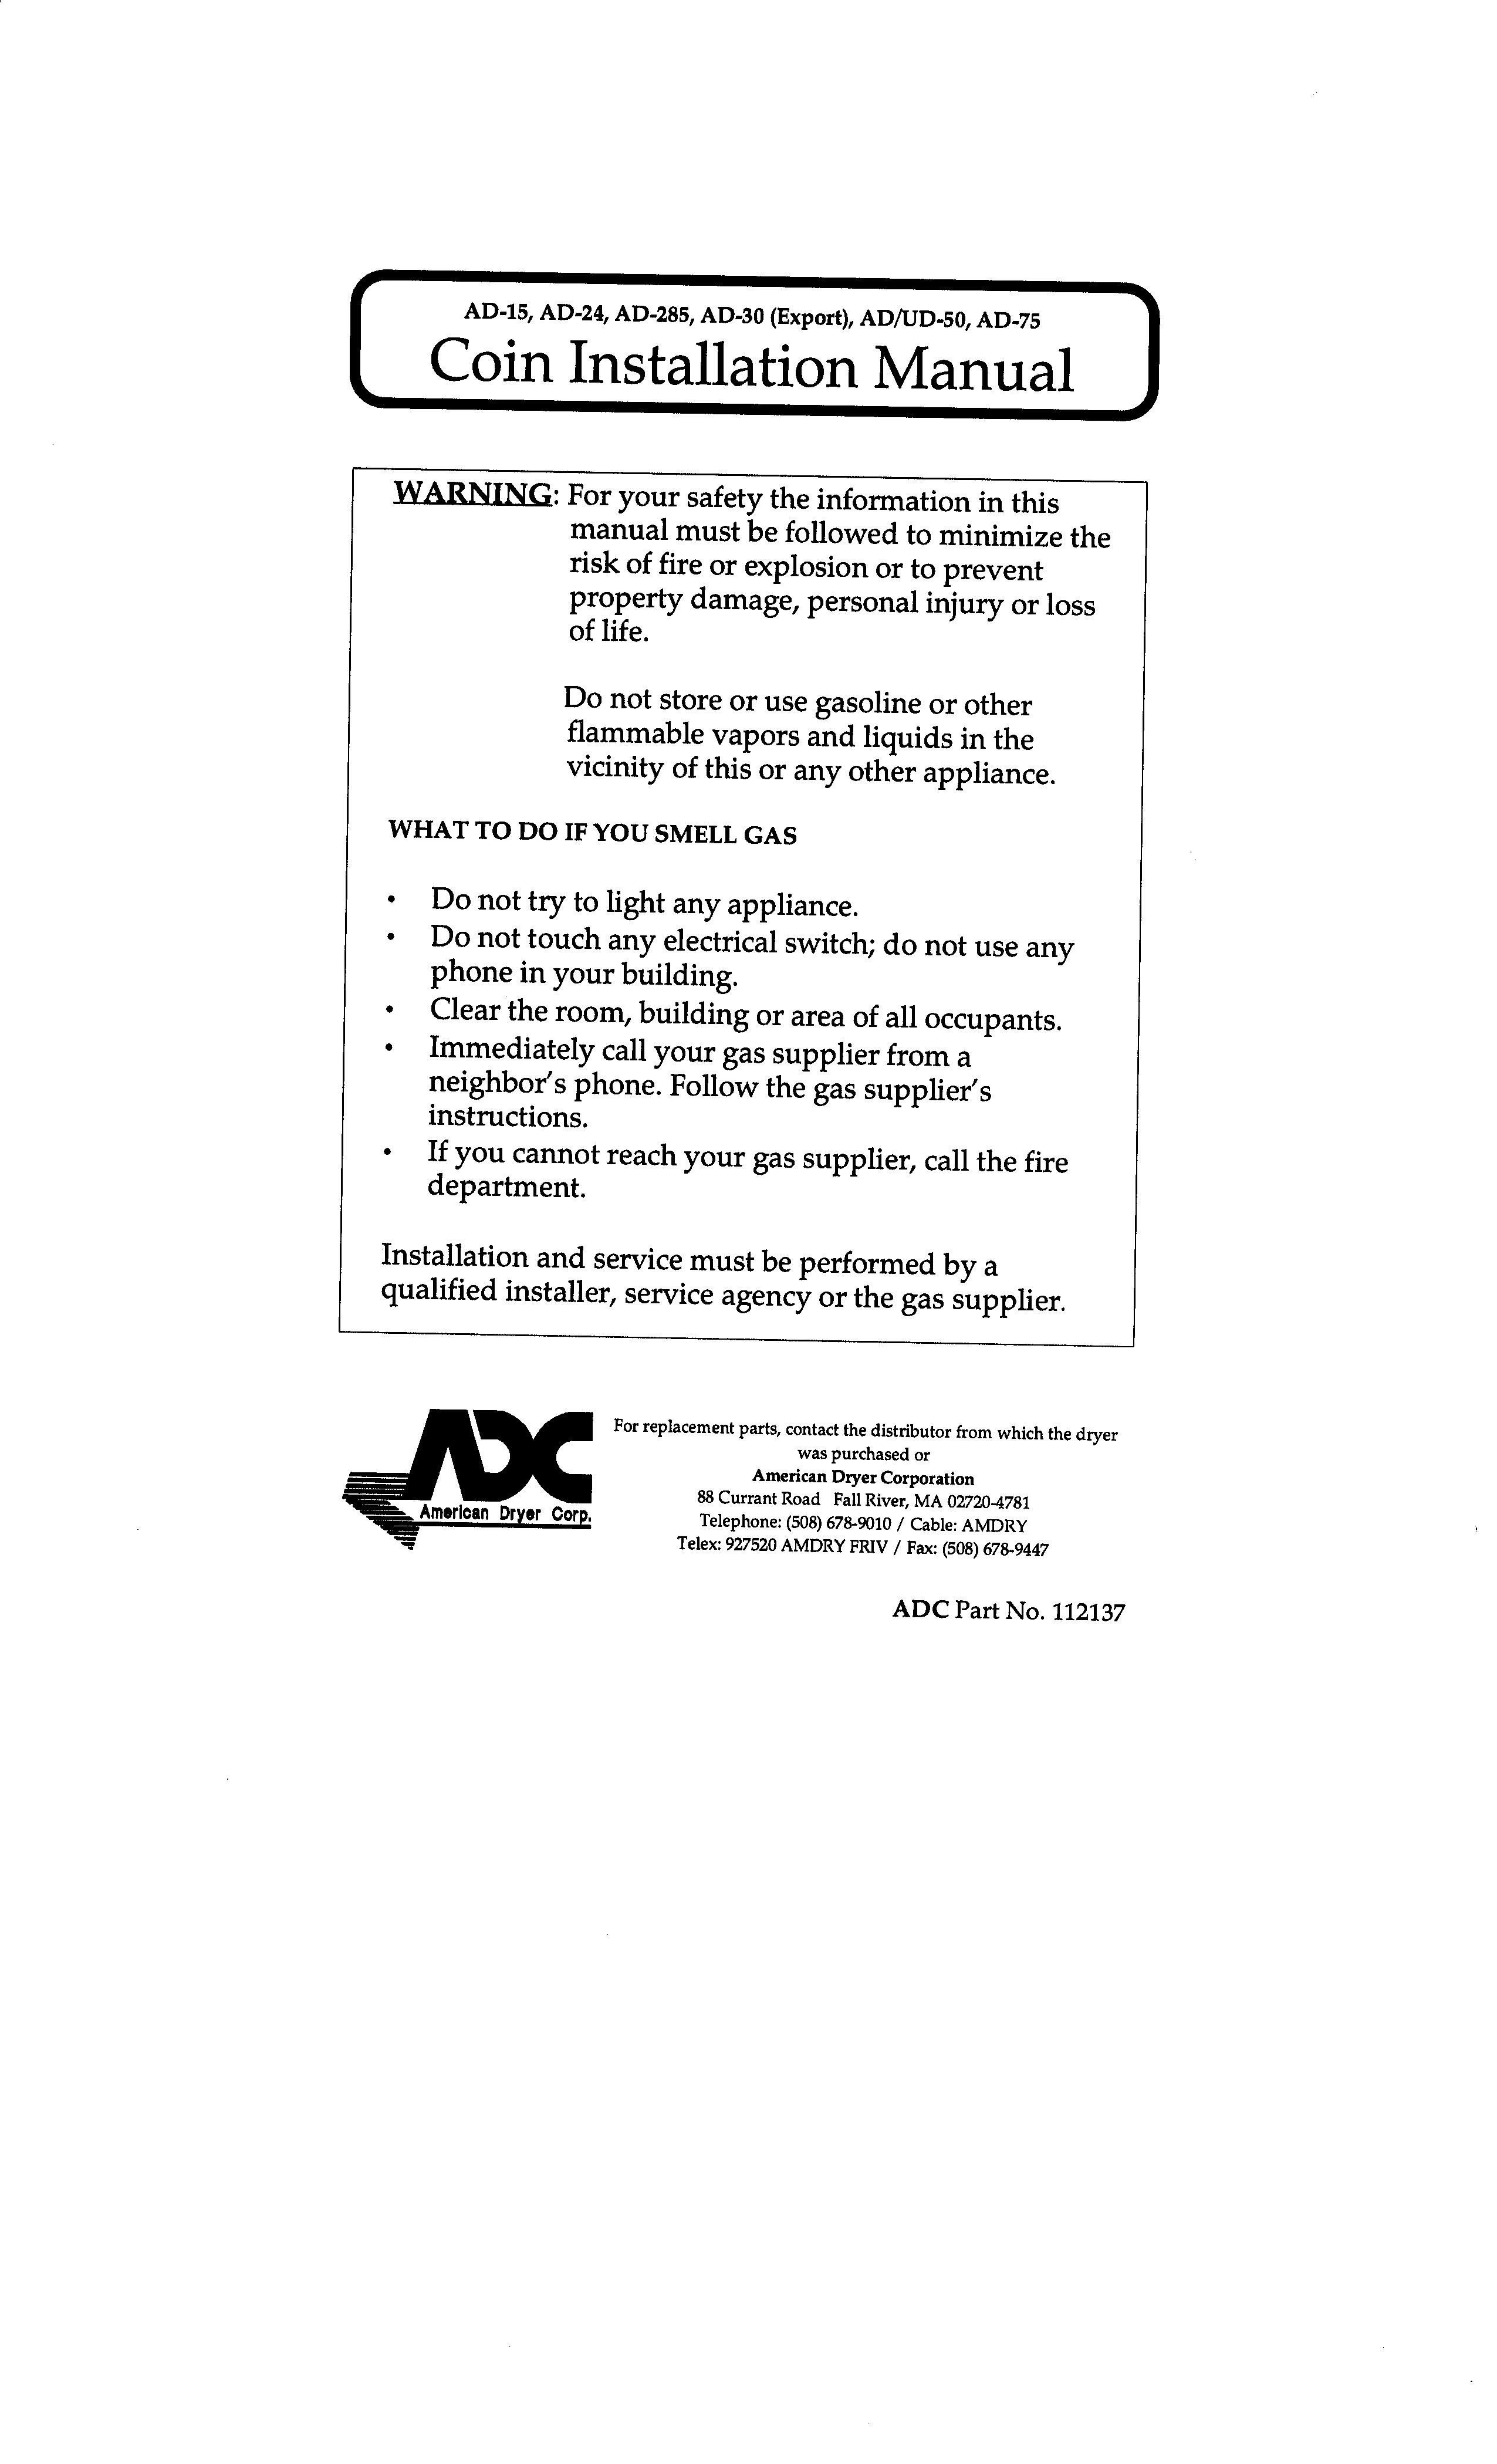 American Dryer Corp. AD-30 (Export) Clothes Dryer User Manual